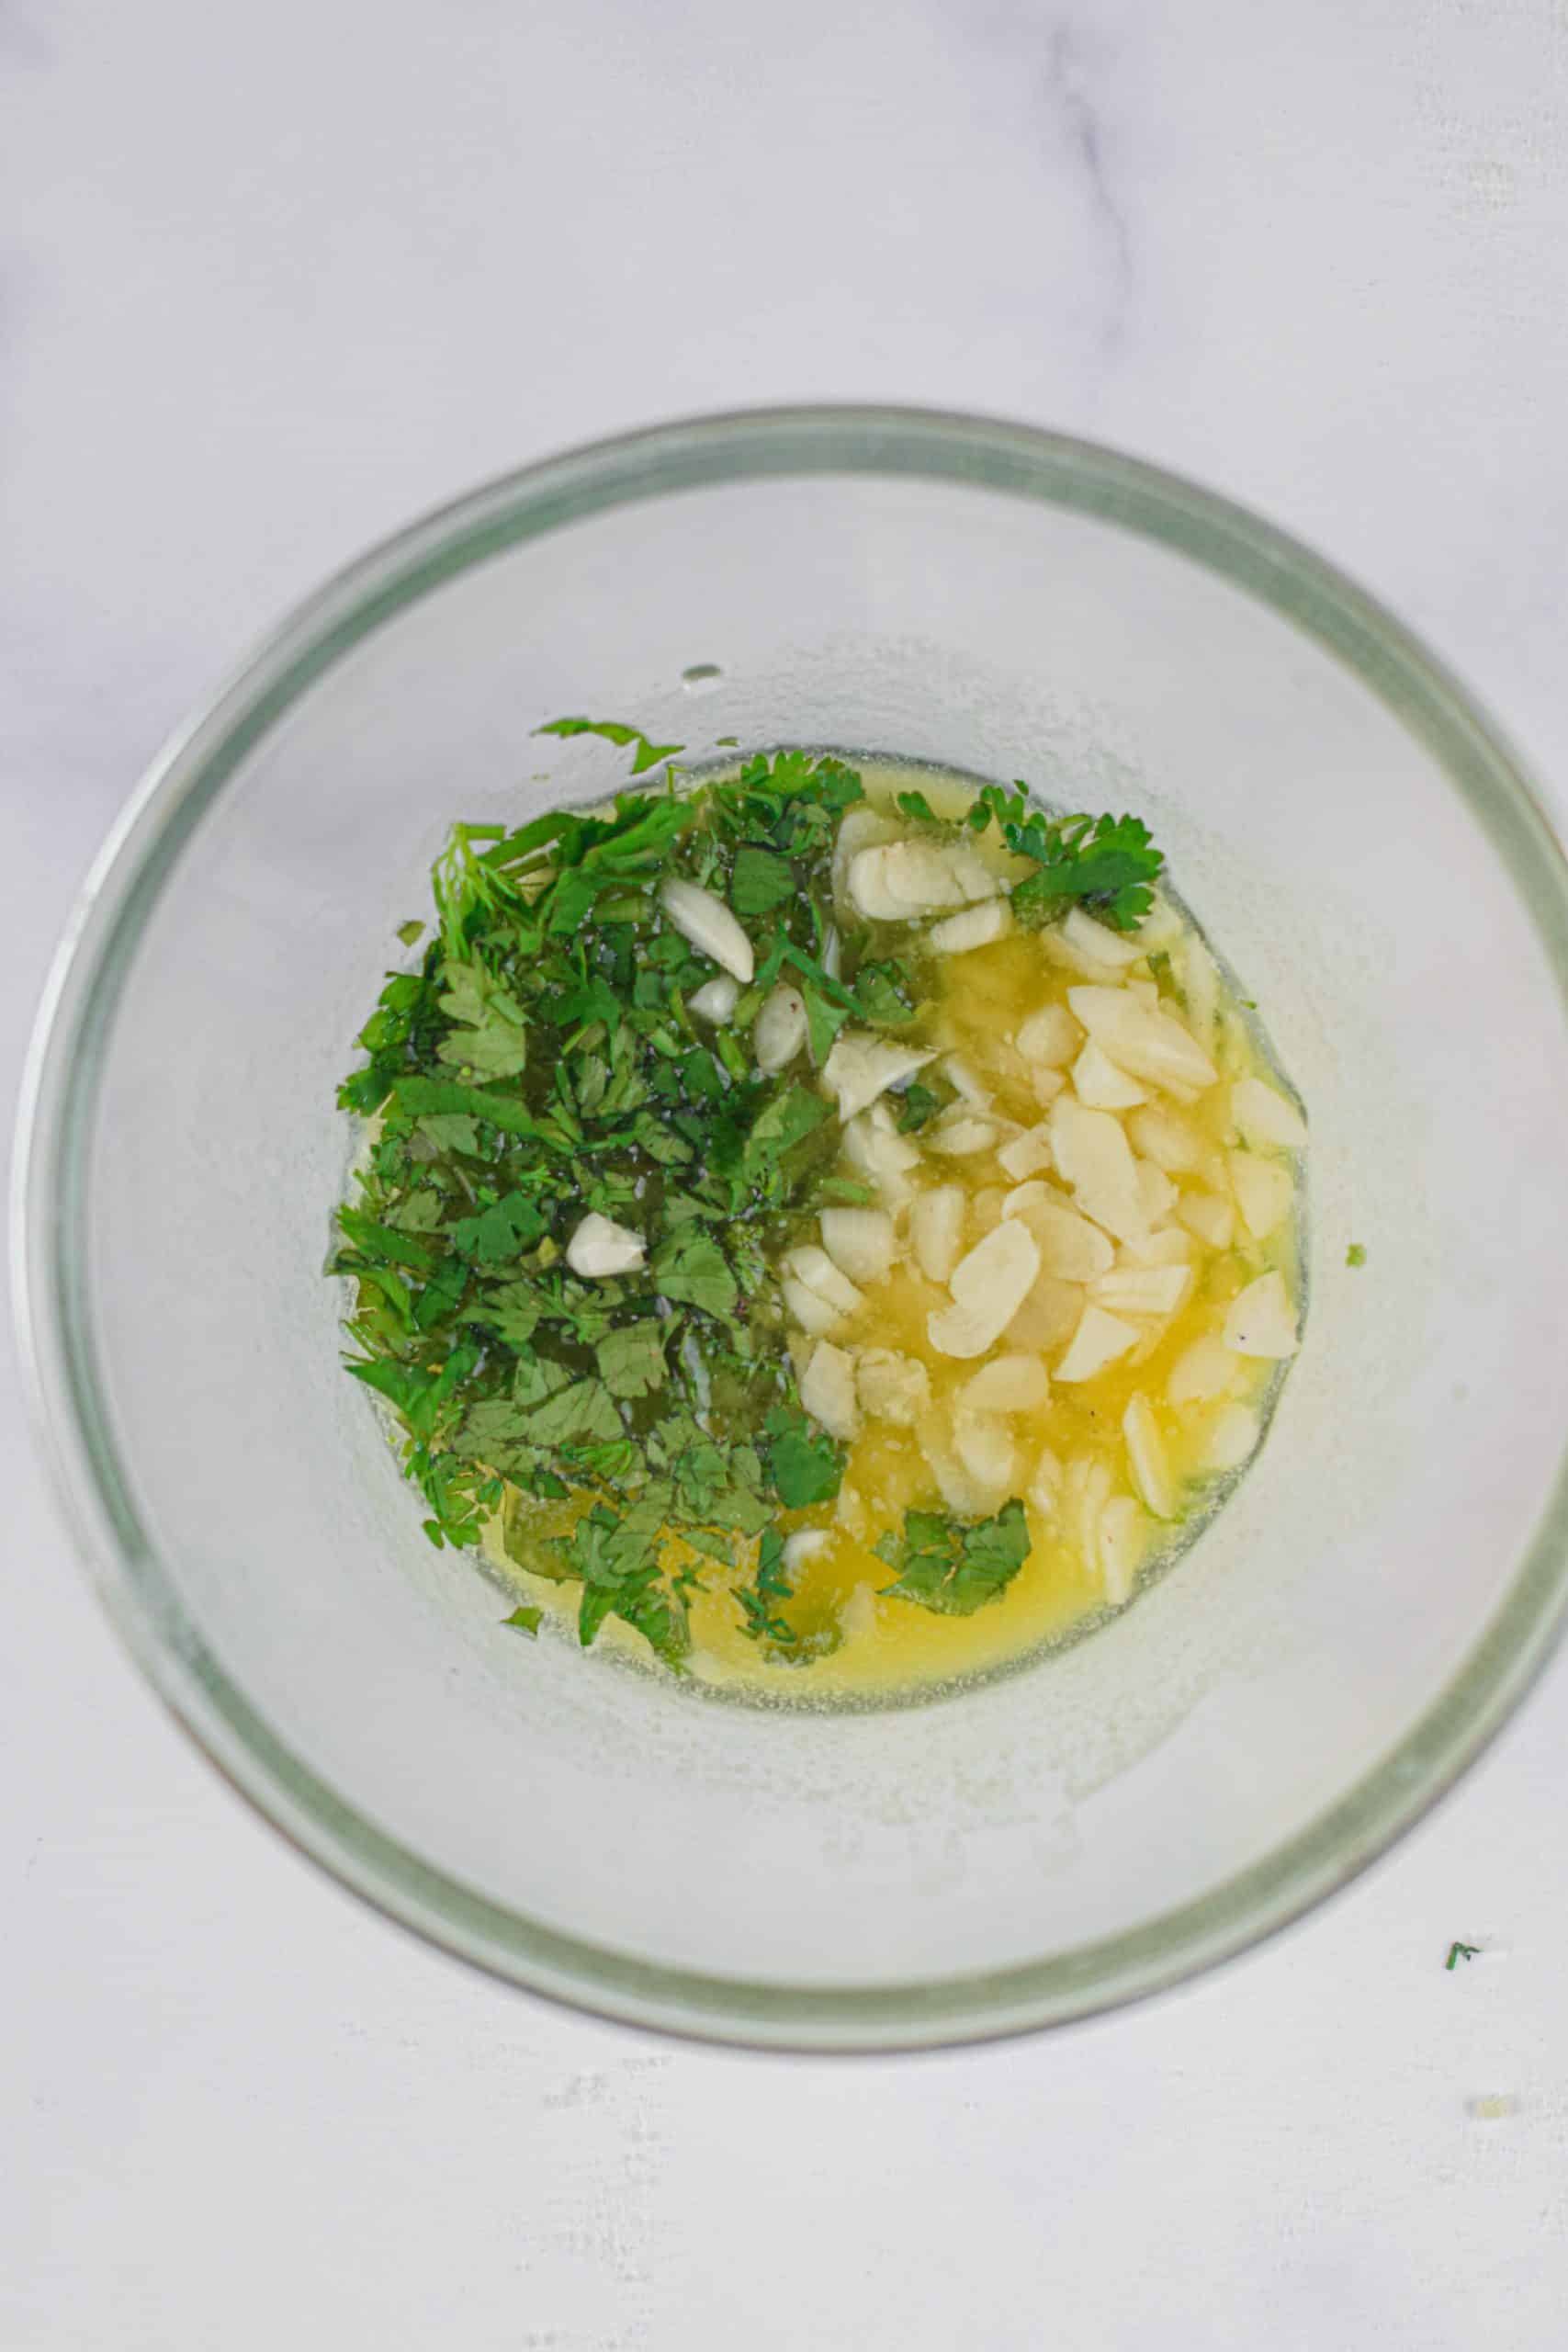 garlic, butter, and herbs in a small glass bowl